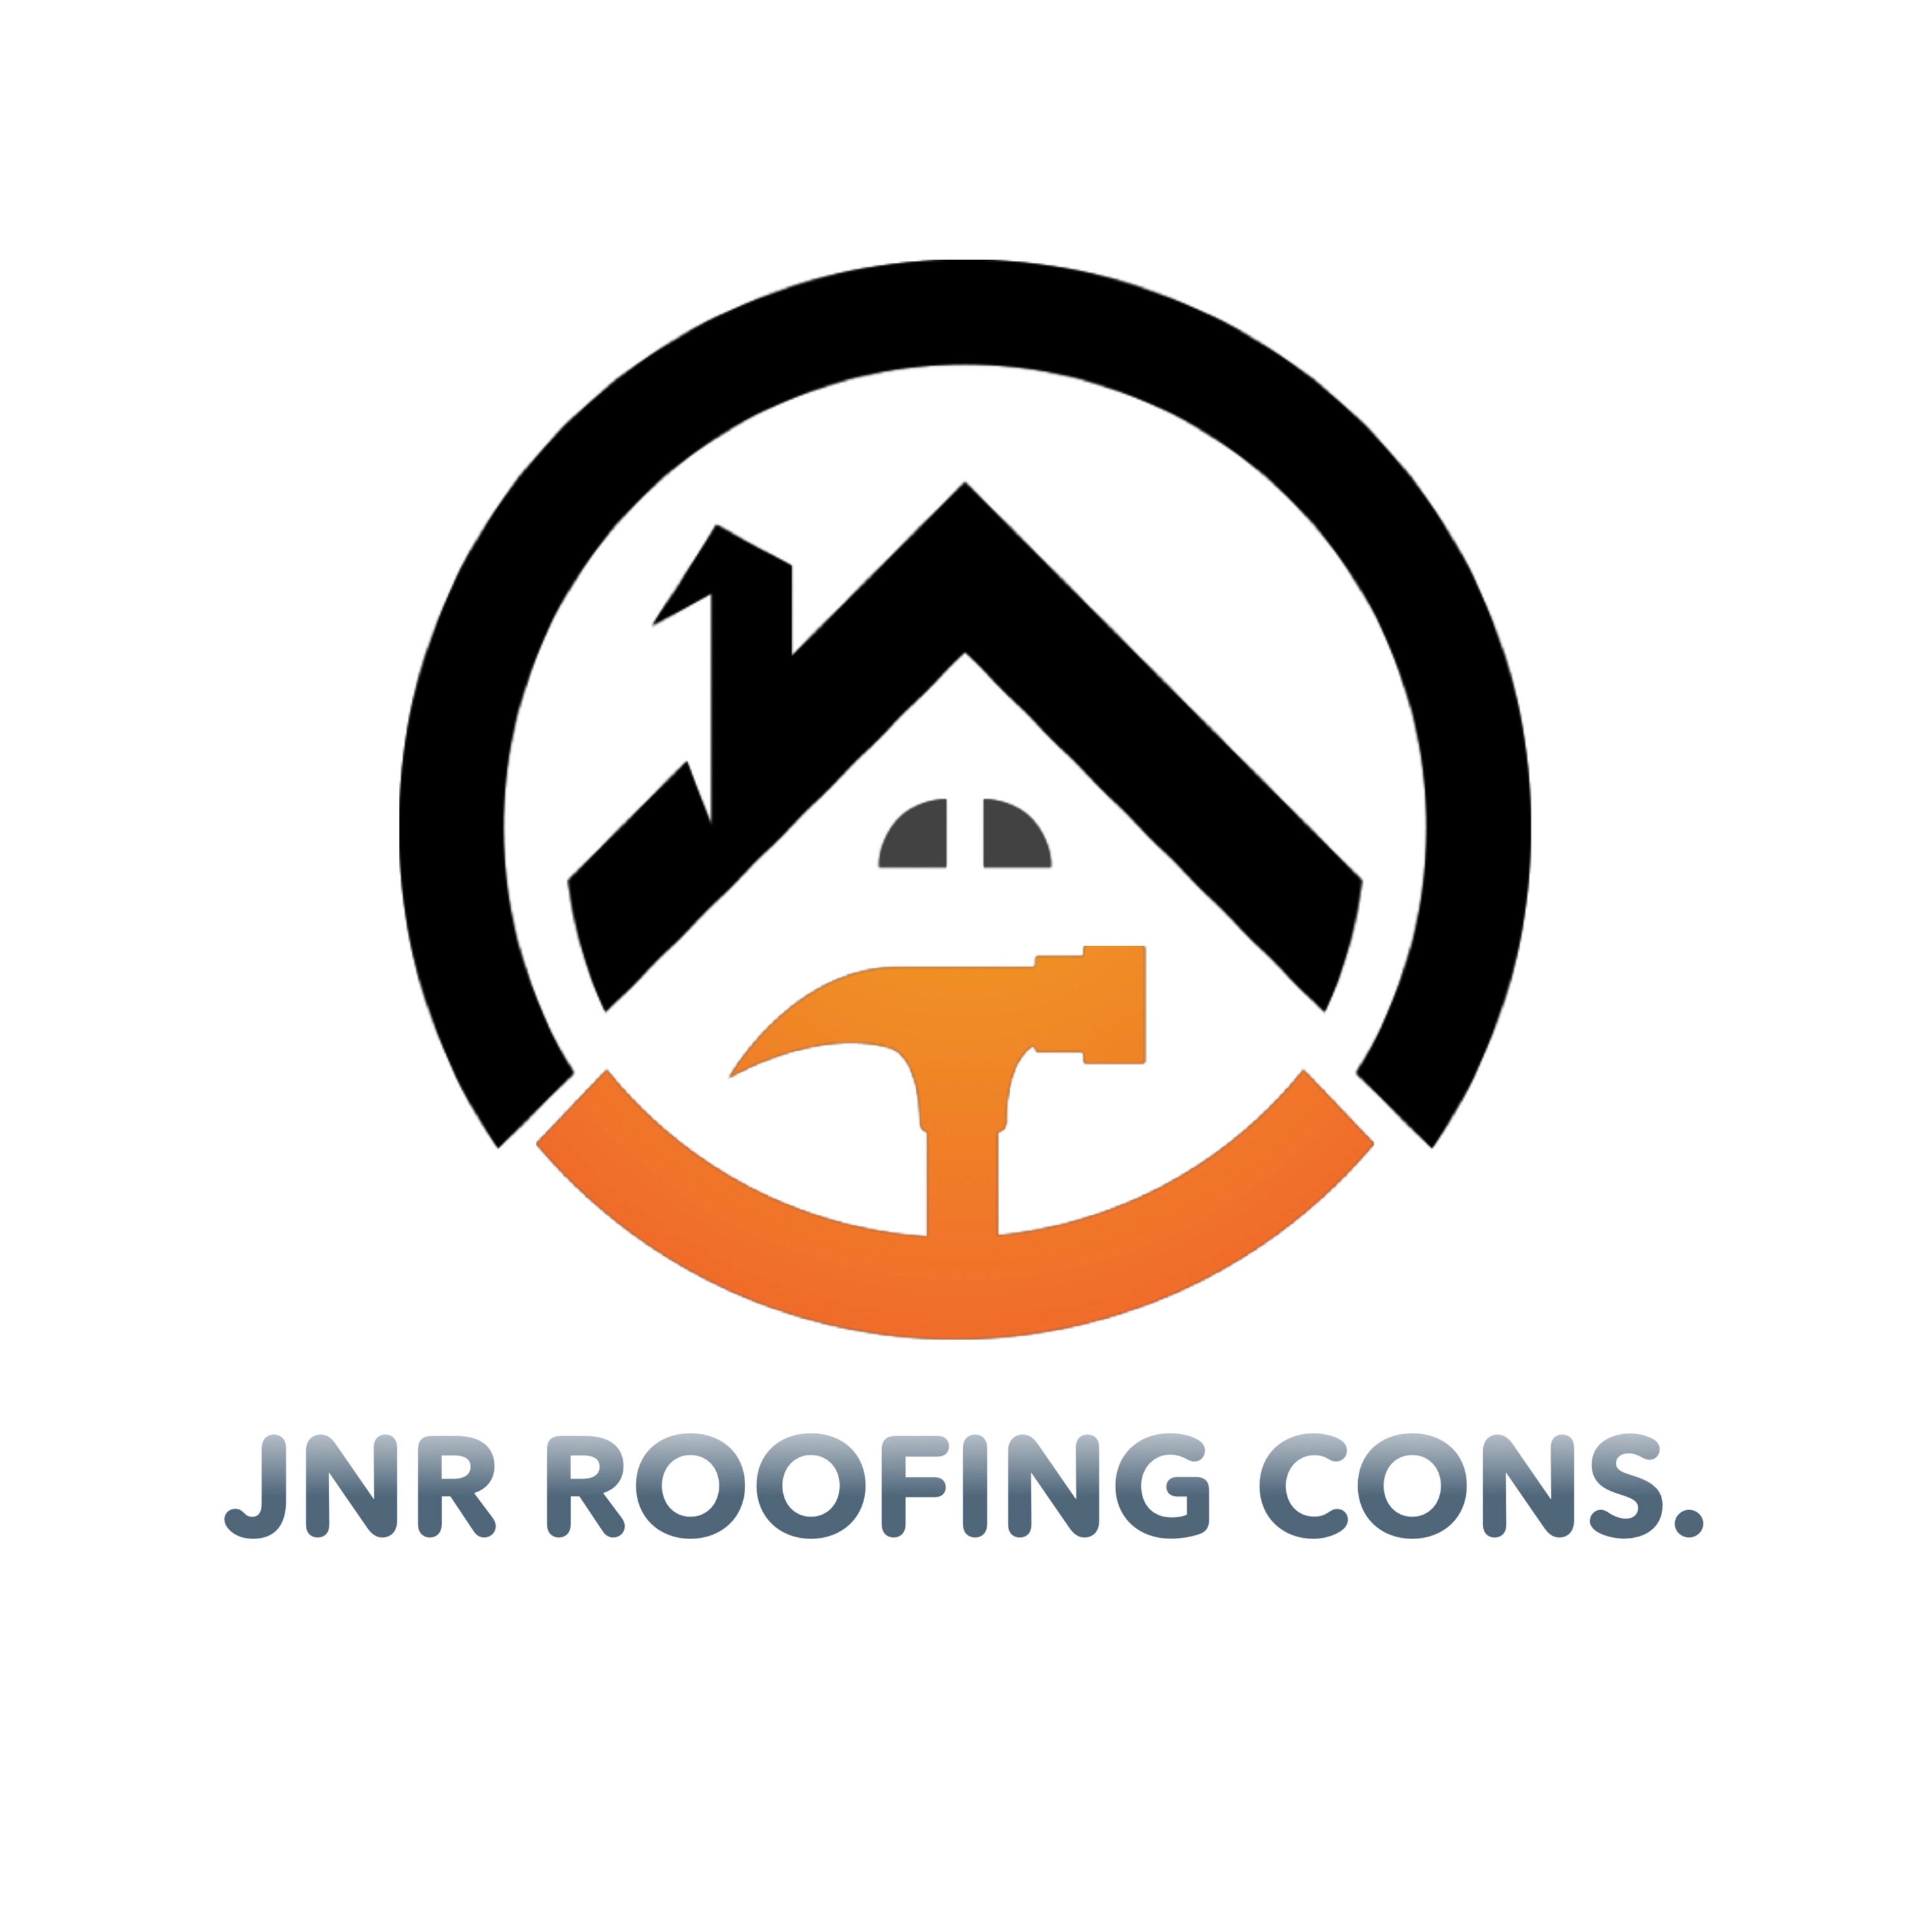 JNR Roofing Cons. Logo